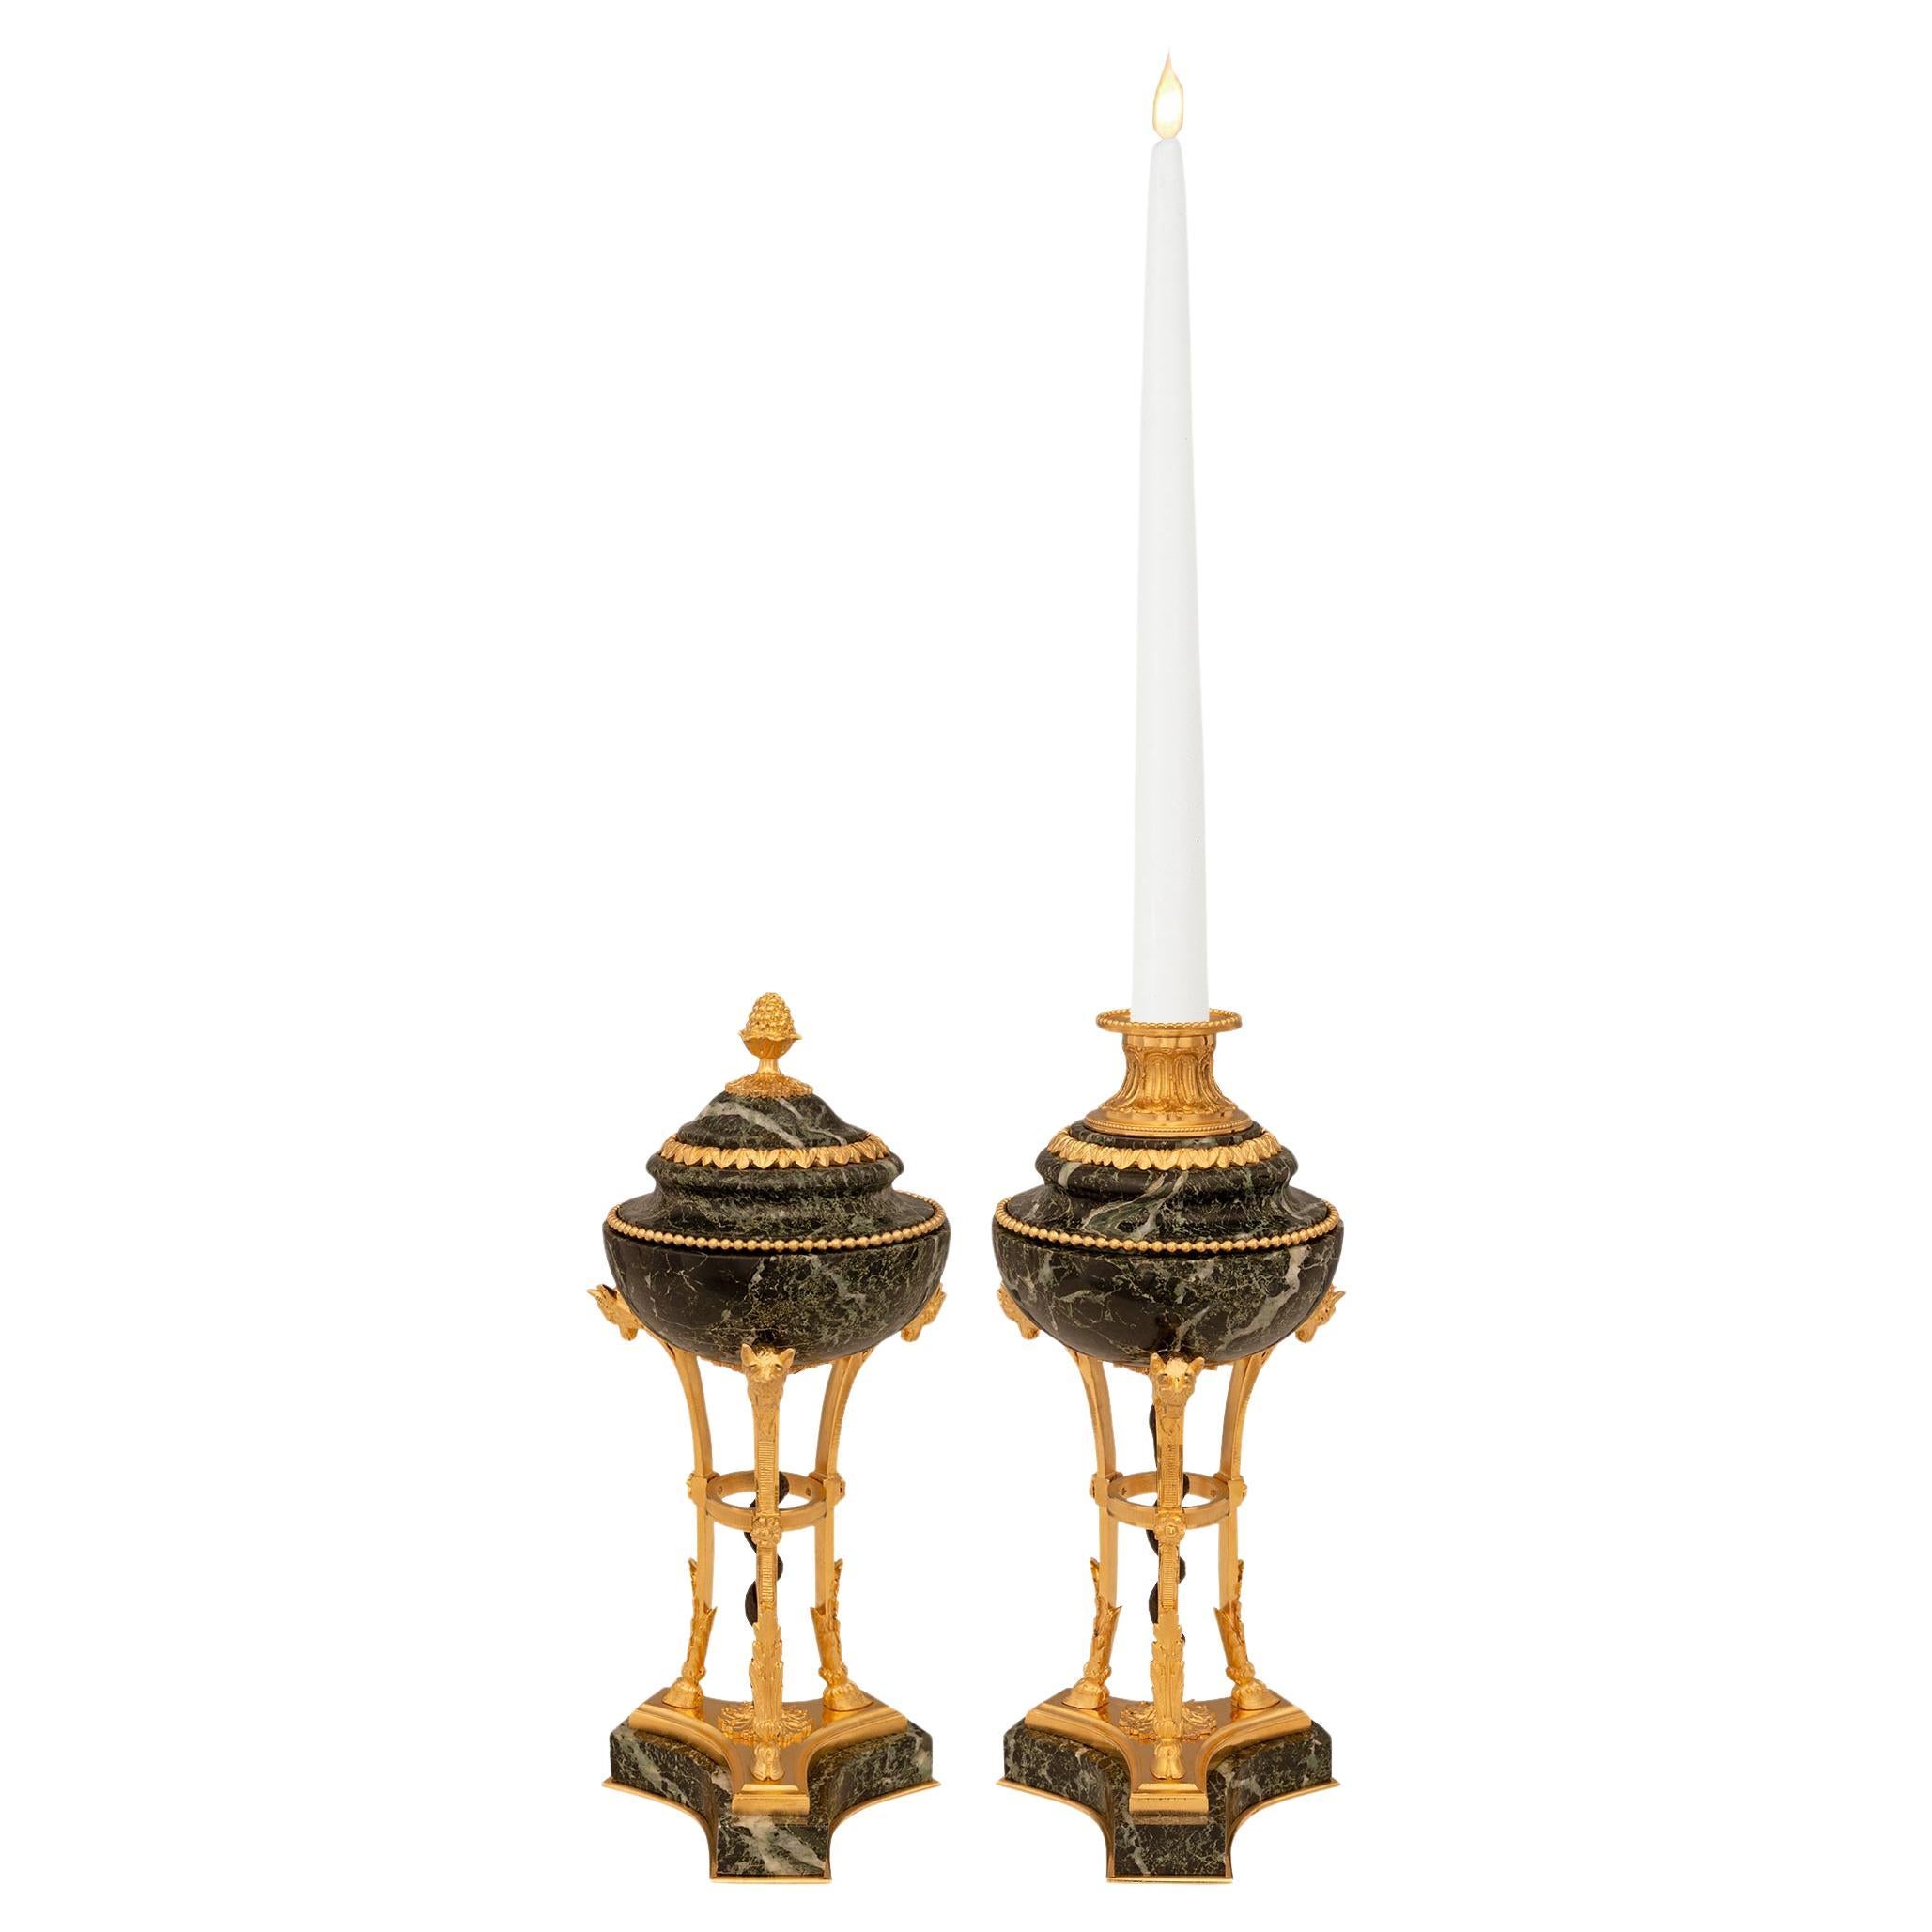 pair of French 19th century Louis XVI st marble and Ormolu candlesticks